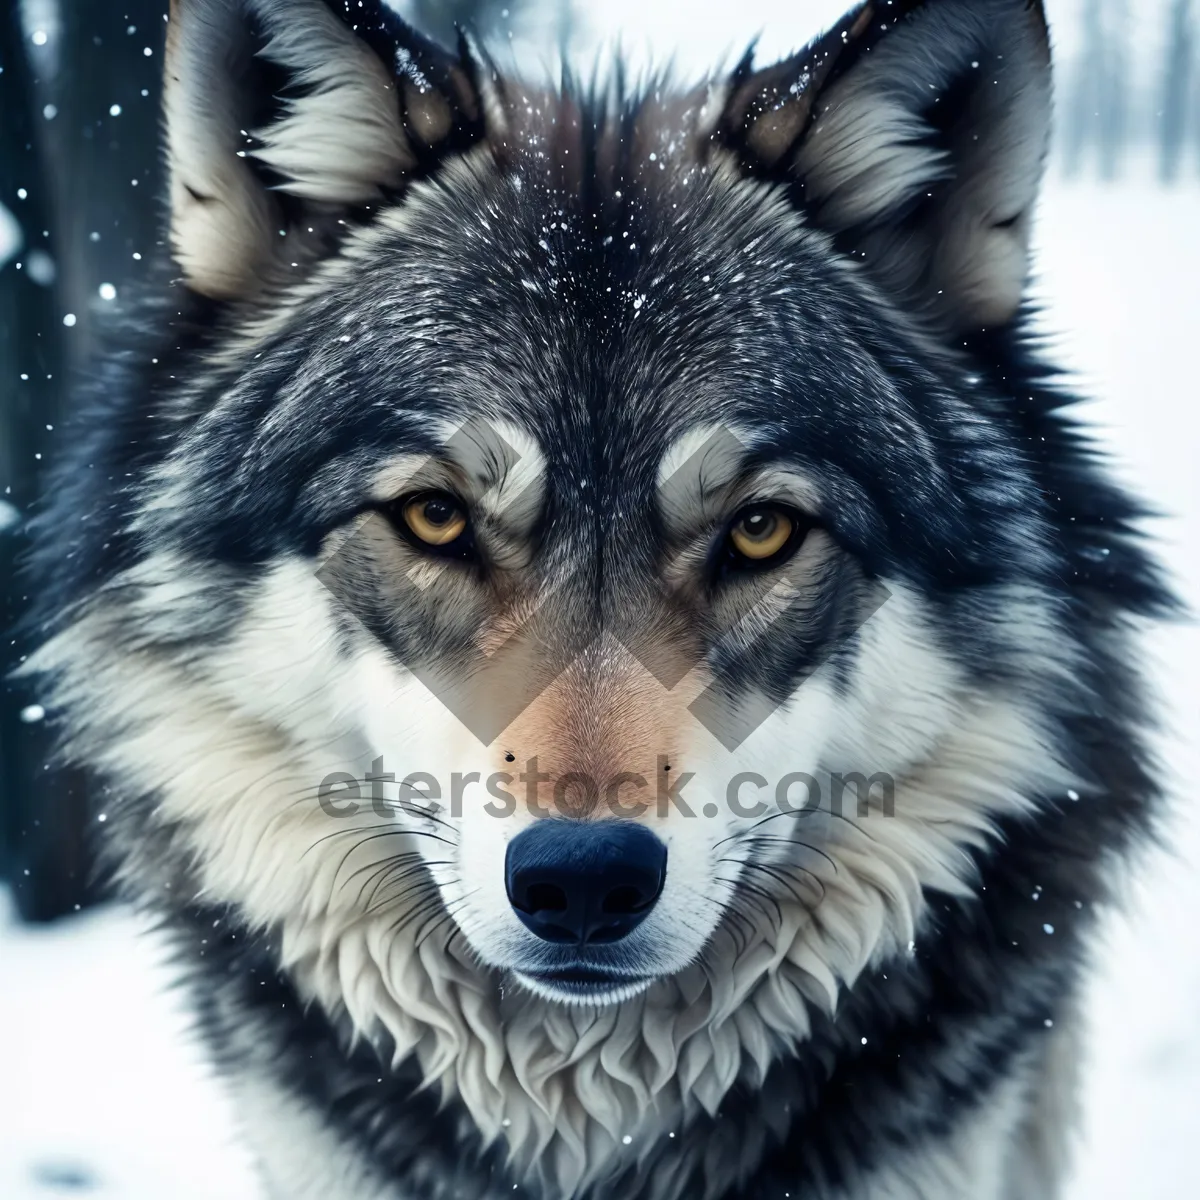 Picture of Wild Timber Wolf with Piercing Eyes